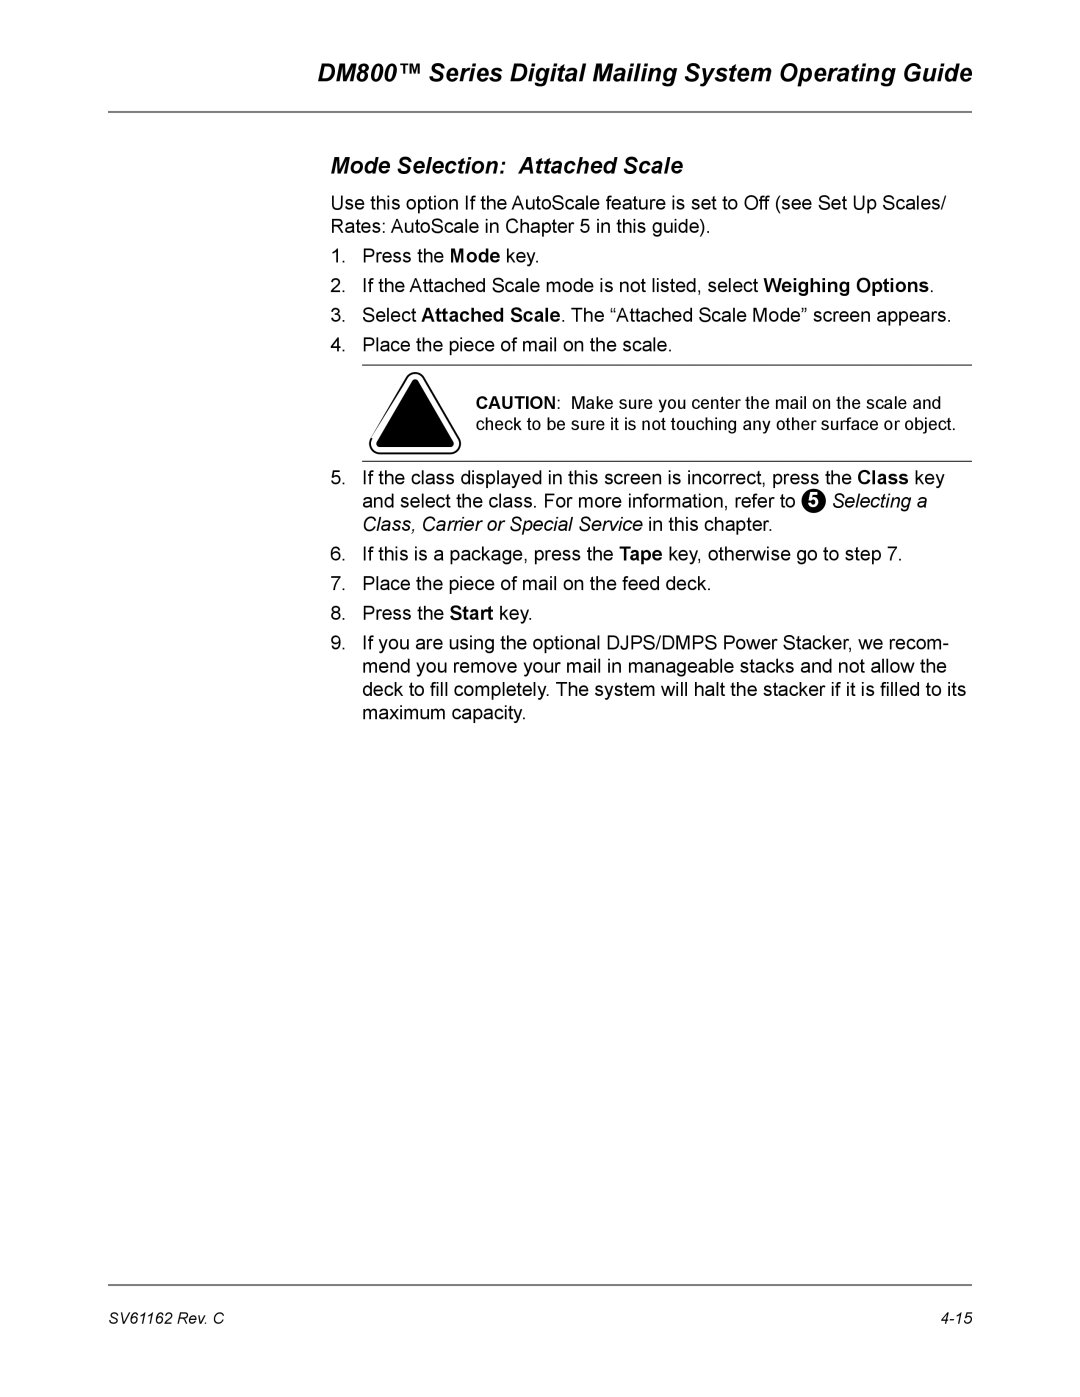 Pitney Bowes DM800 manual Mode Selection Attached Scale 